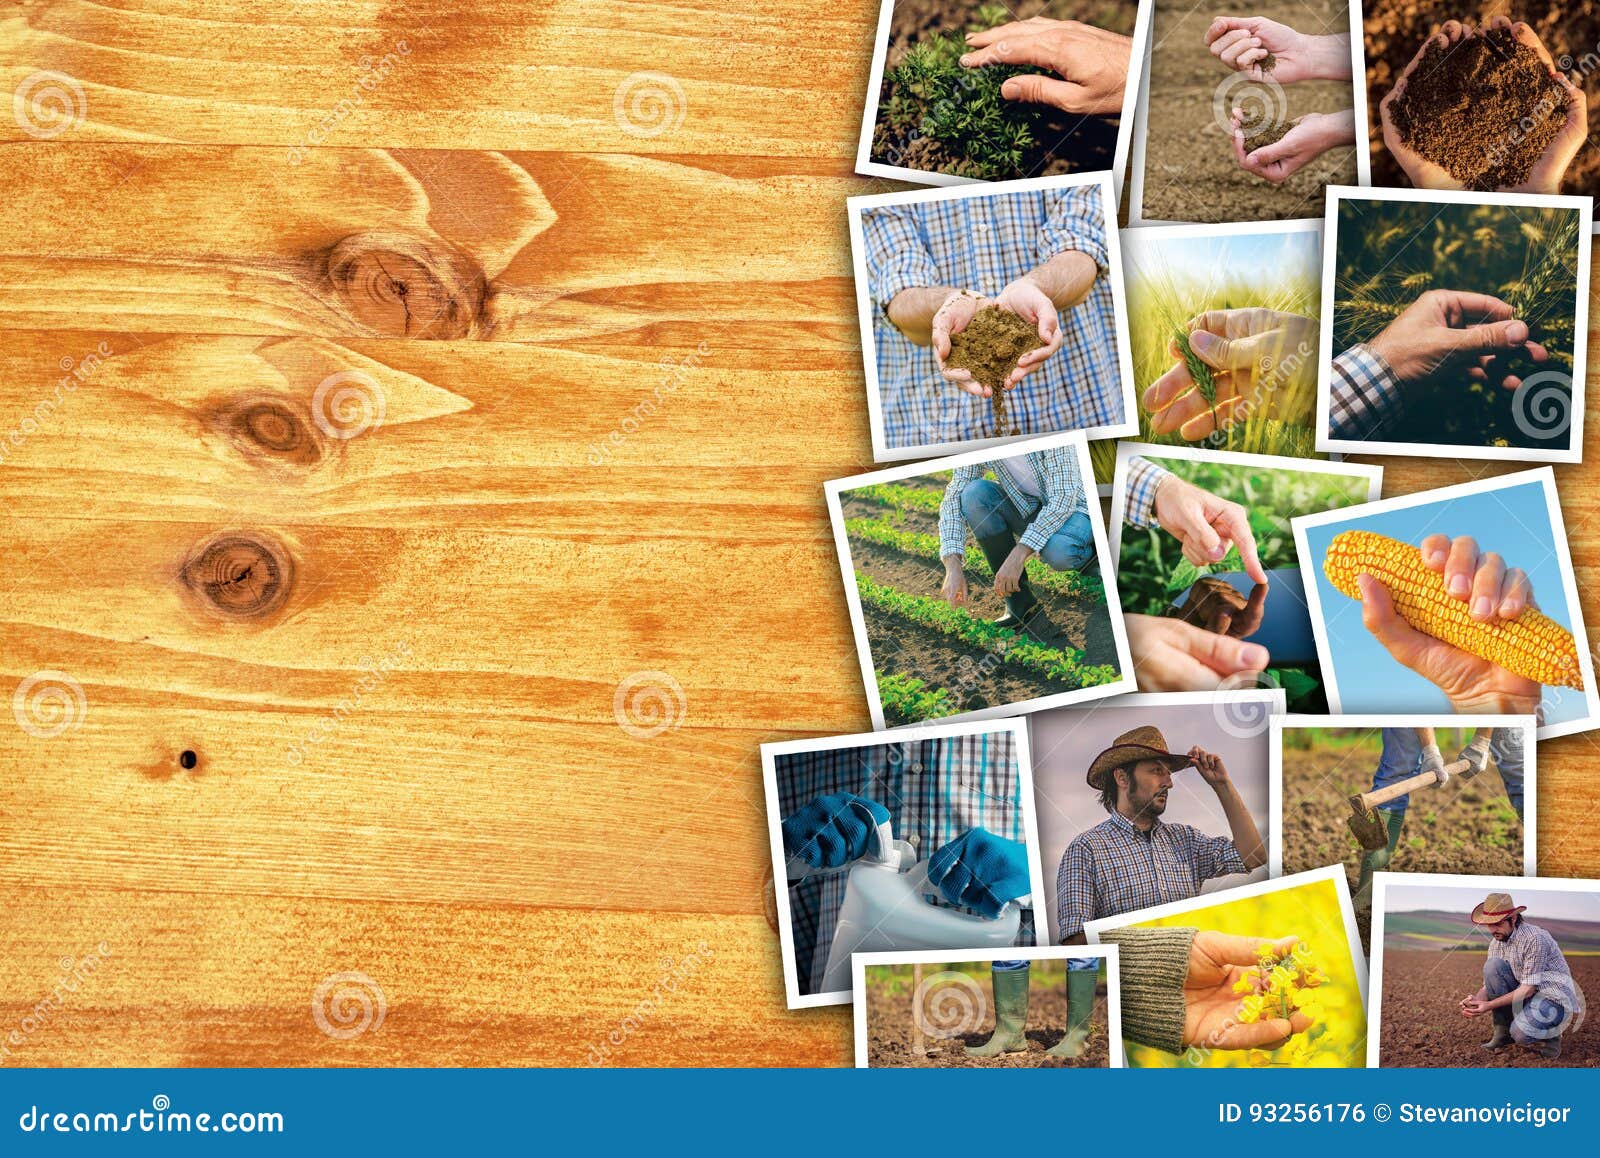 man in farming and agriculture, photo collage with copy space